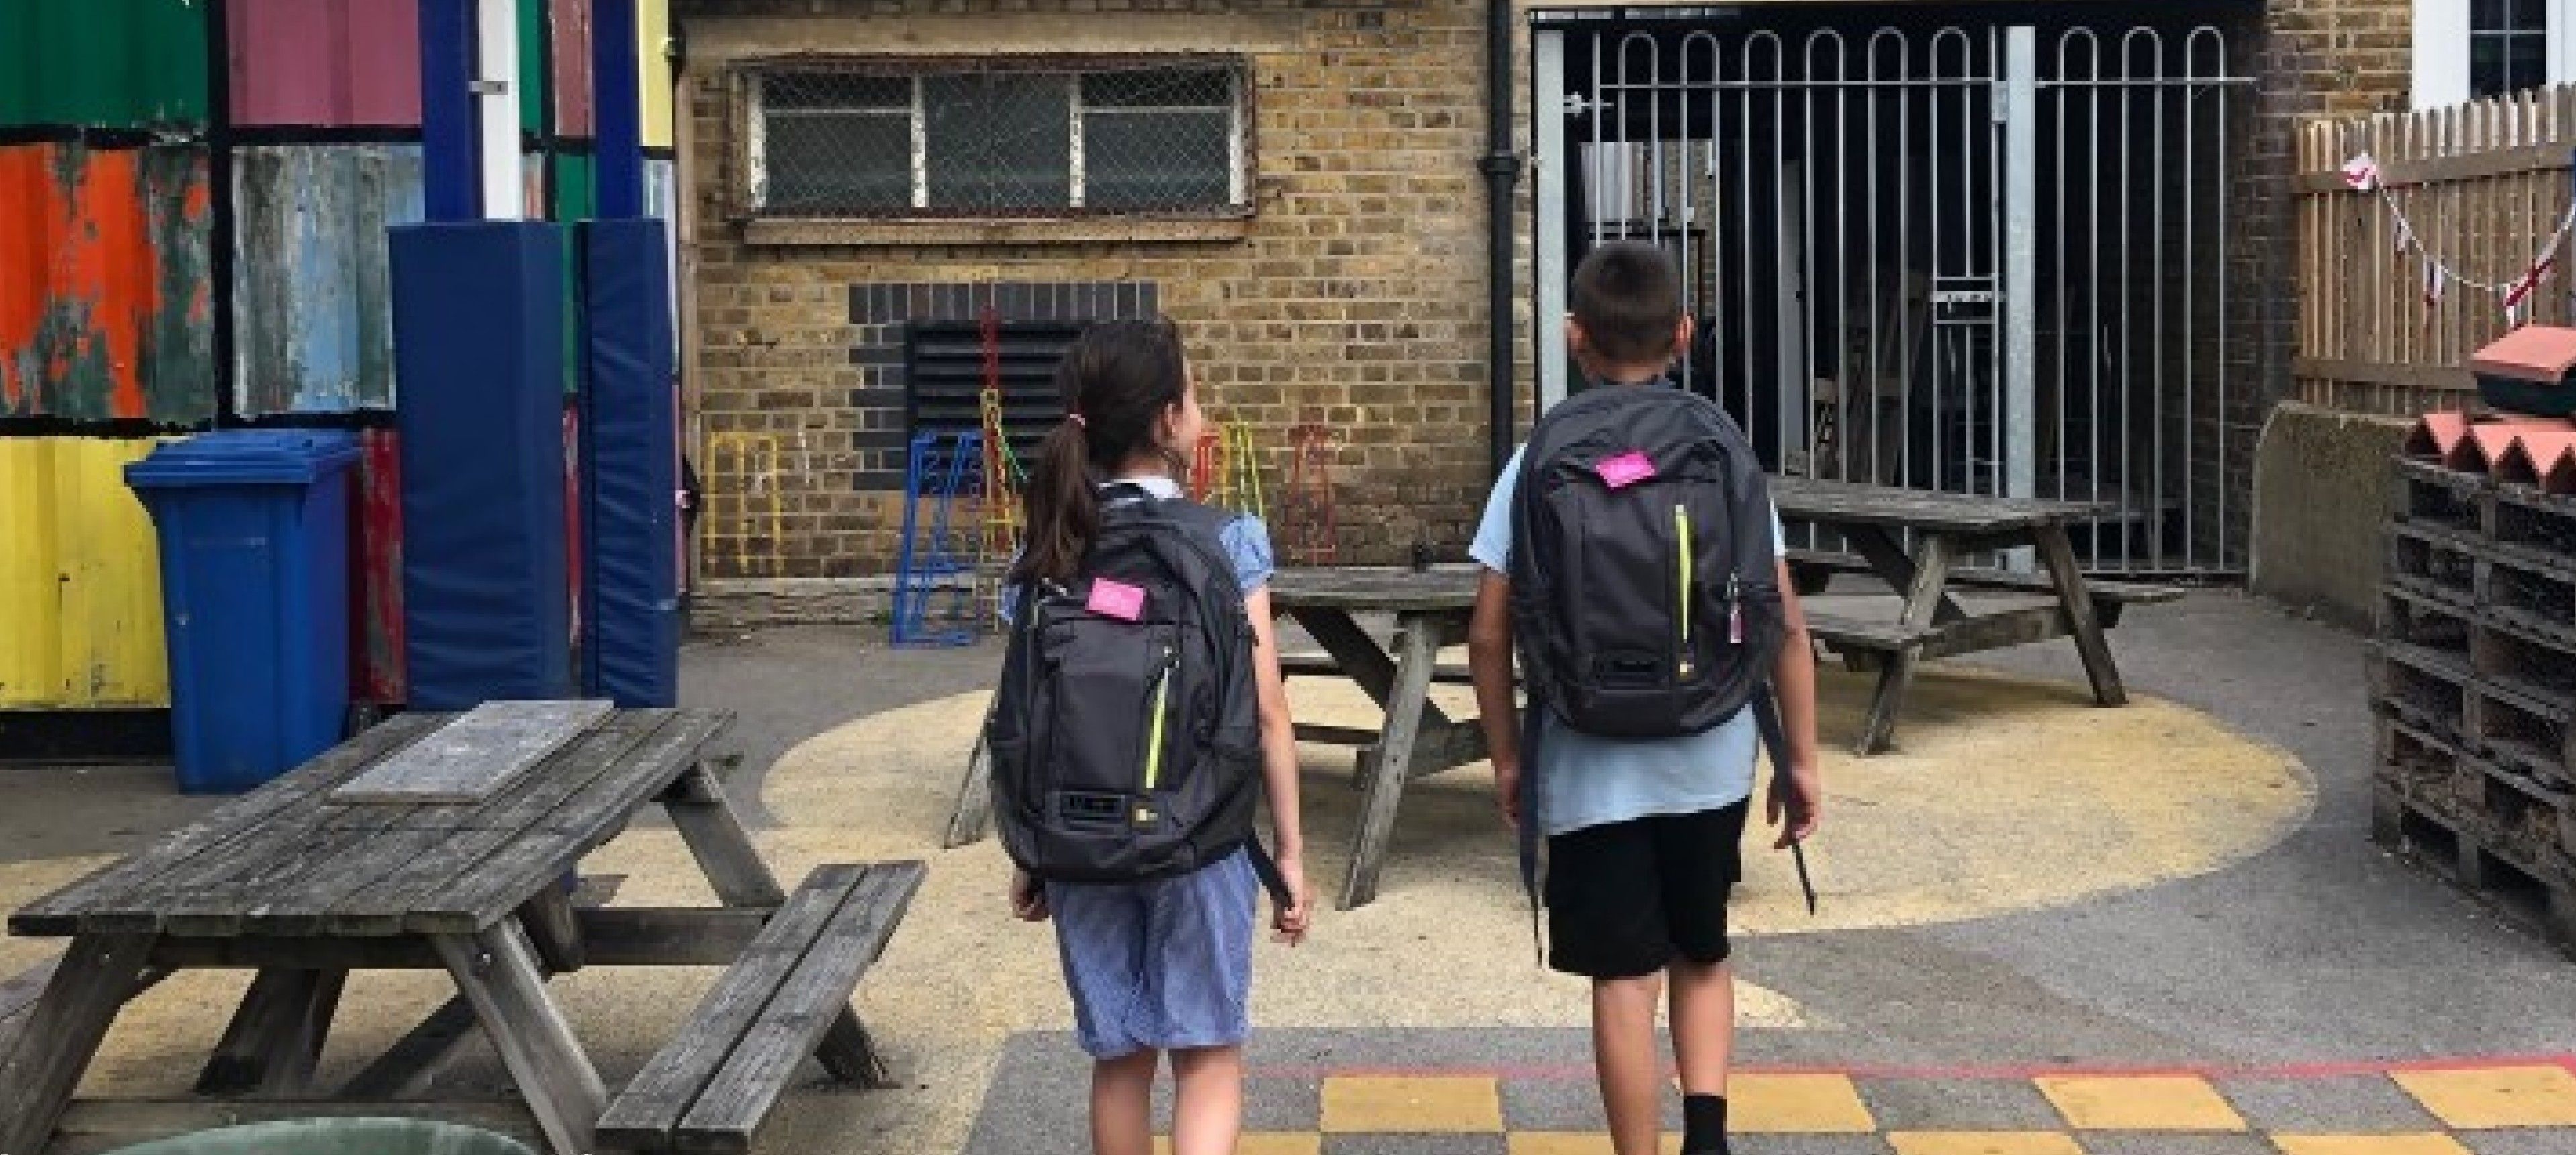 Children carrying backpacks with air quality sensors